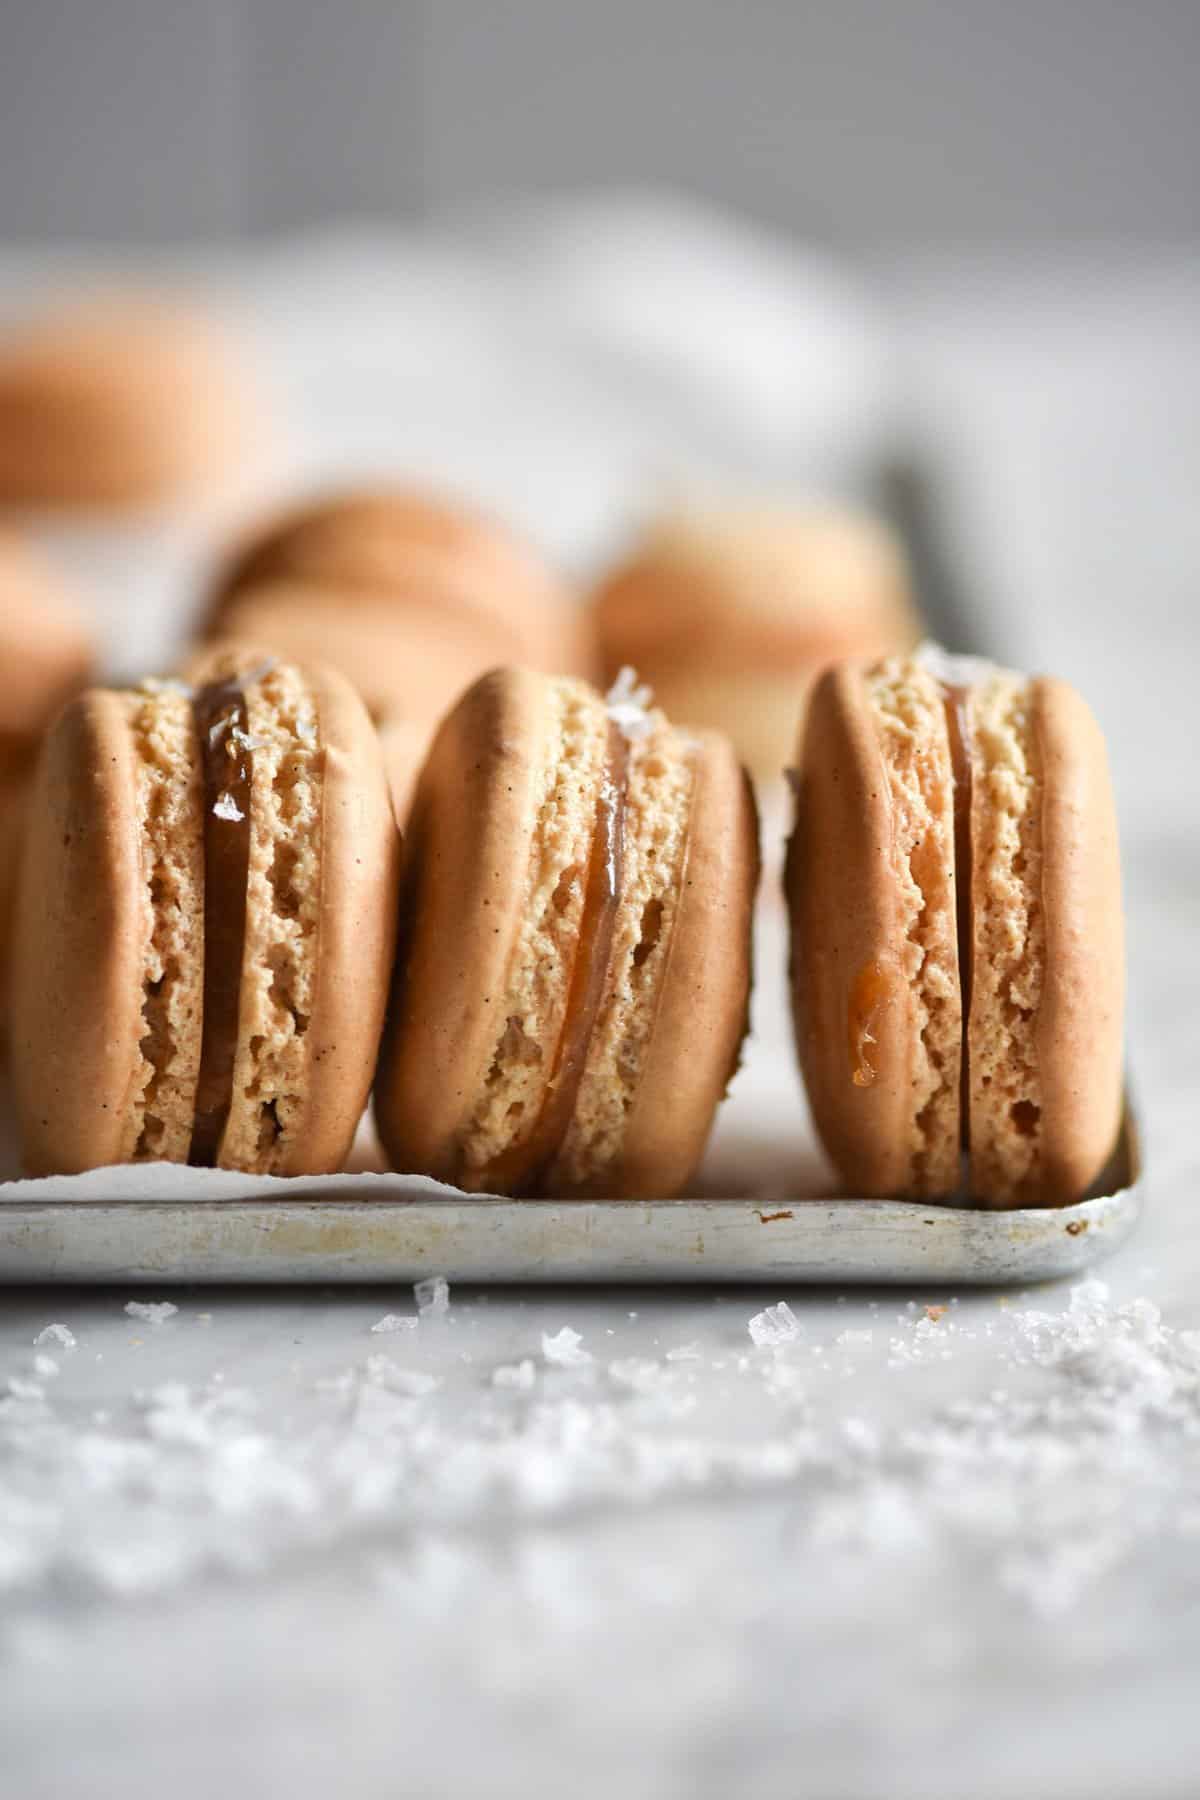 Salted banana caramel macarons from FODMAP Friendly, the cookbook. Available at www.georgeats.com